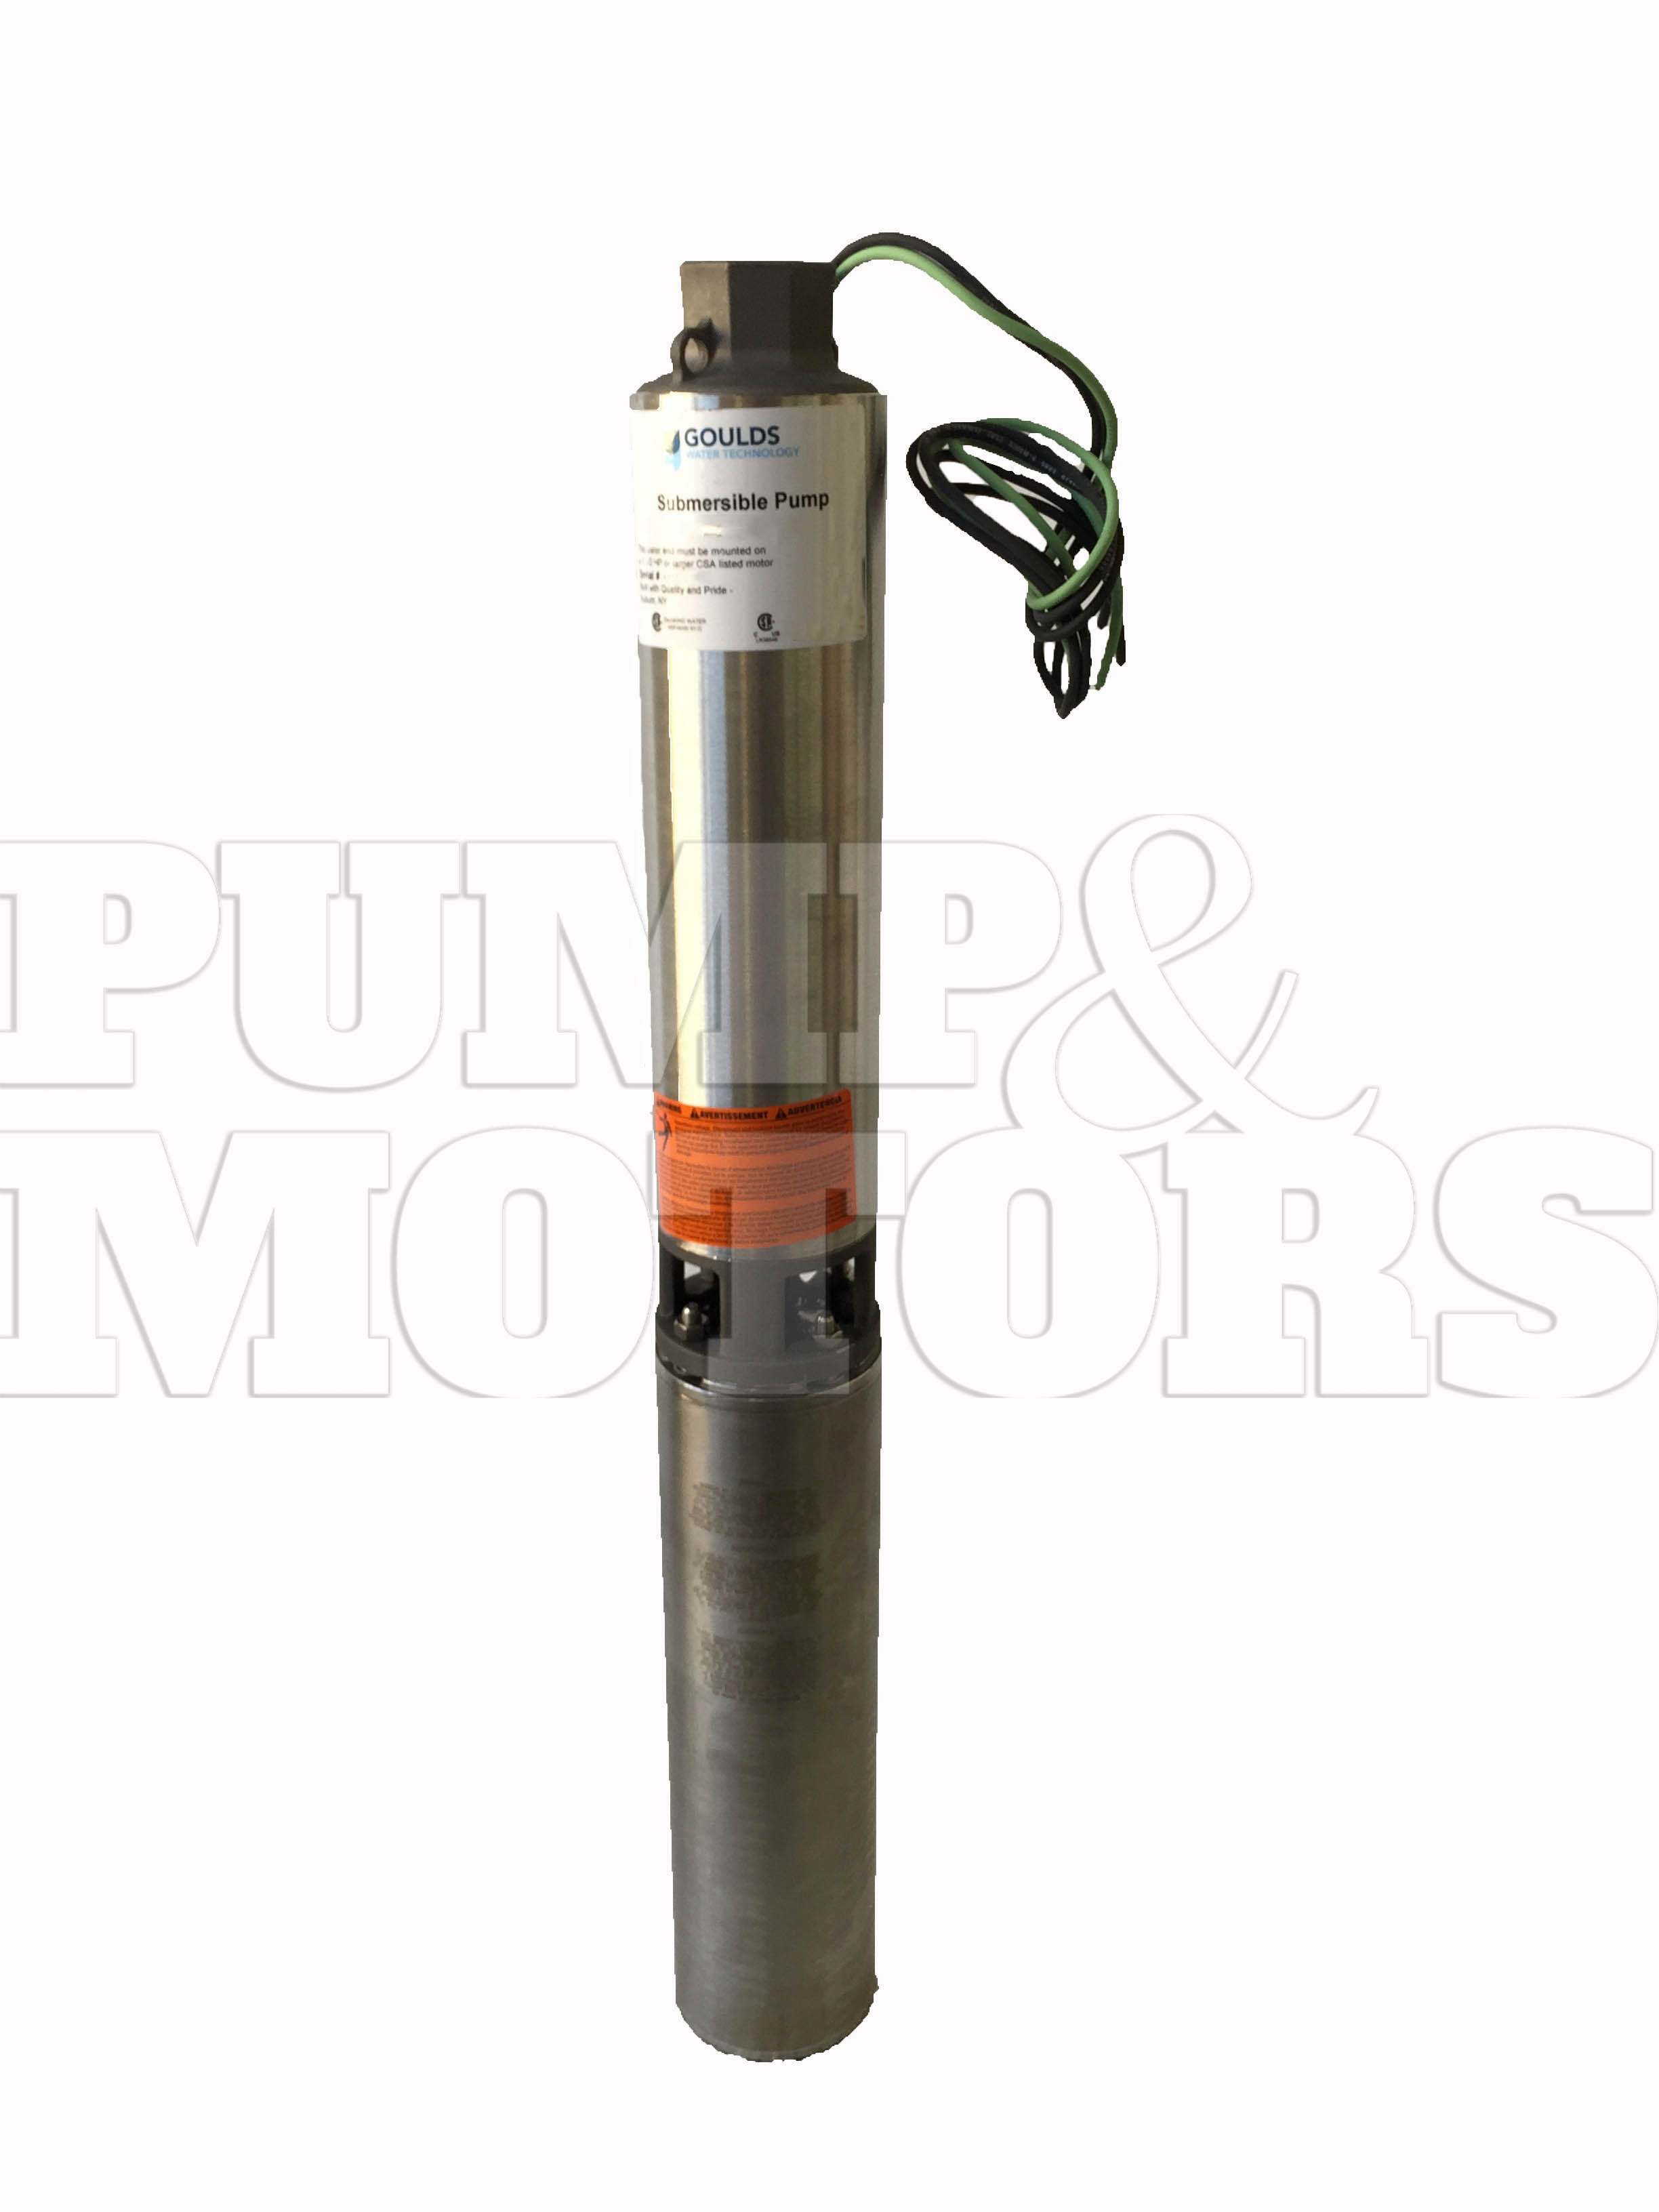 Goulds 18GS07422C 3/4HP 230V Submersible Water Well Pump 18GPM